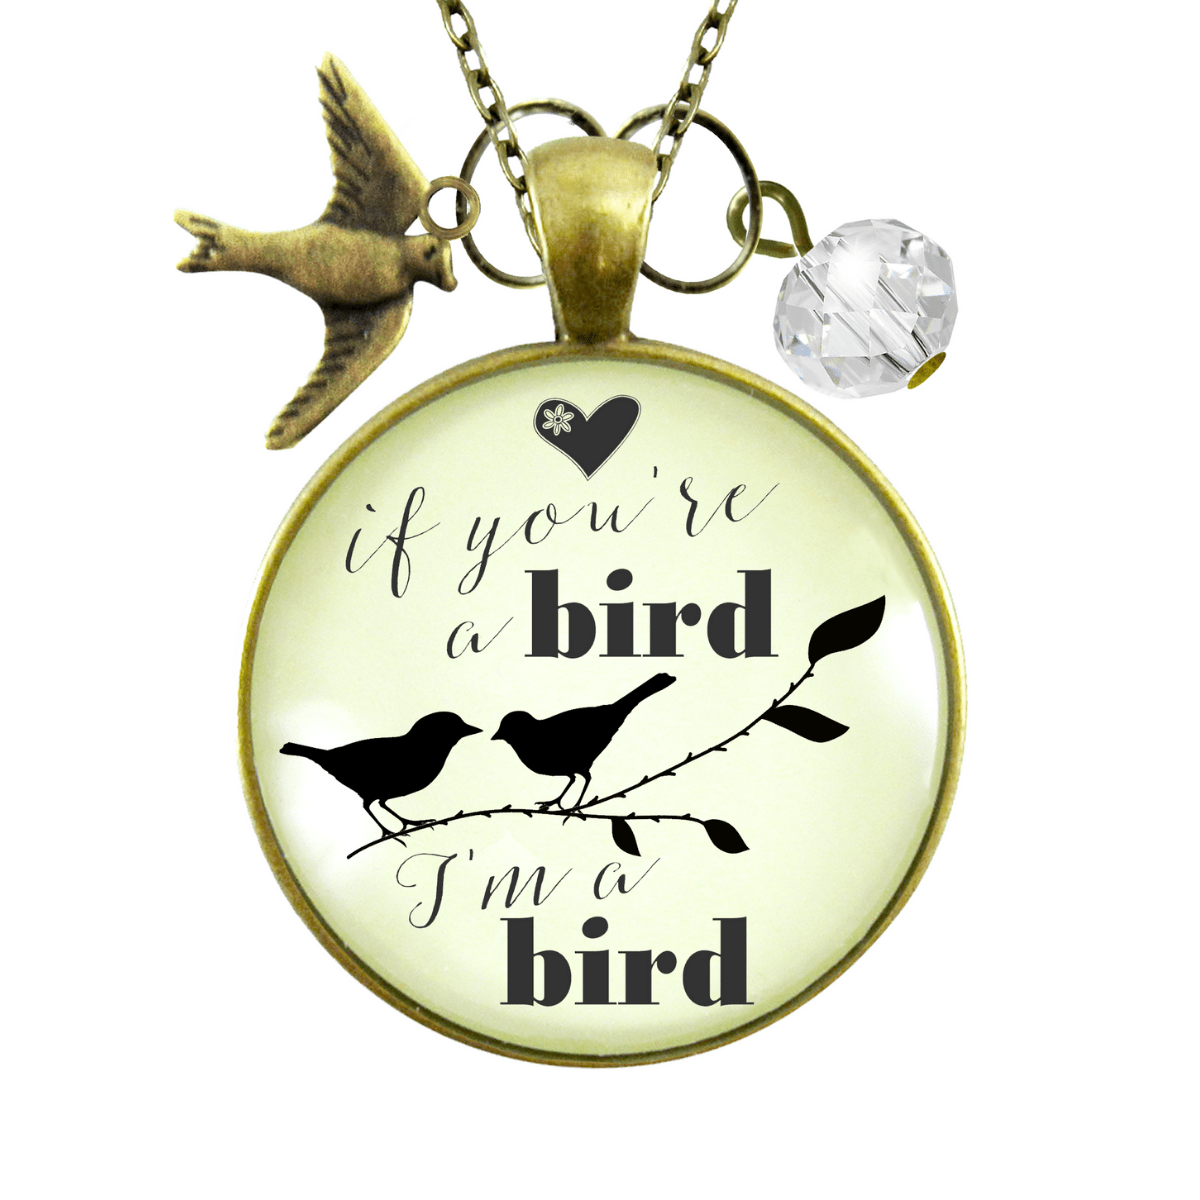 Gutsy Goodness If You're a Bird I'm a Bird Necklace Love Quote Boho Jewelry Gift - Gutsy Goodness Handmade Jewelry;If You're A Bird I'm A Bird - Gutsy Goodness Handmade Jewelry Gifts